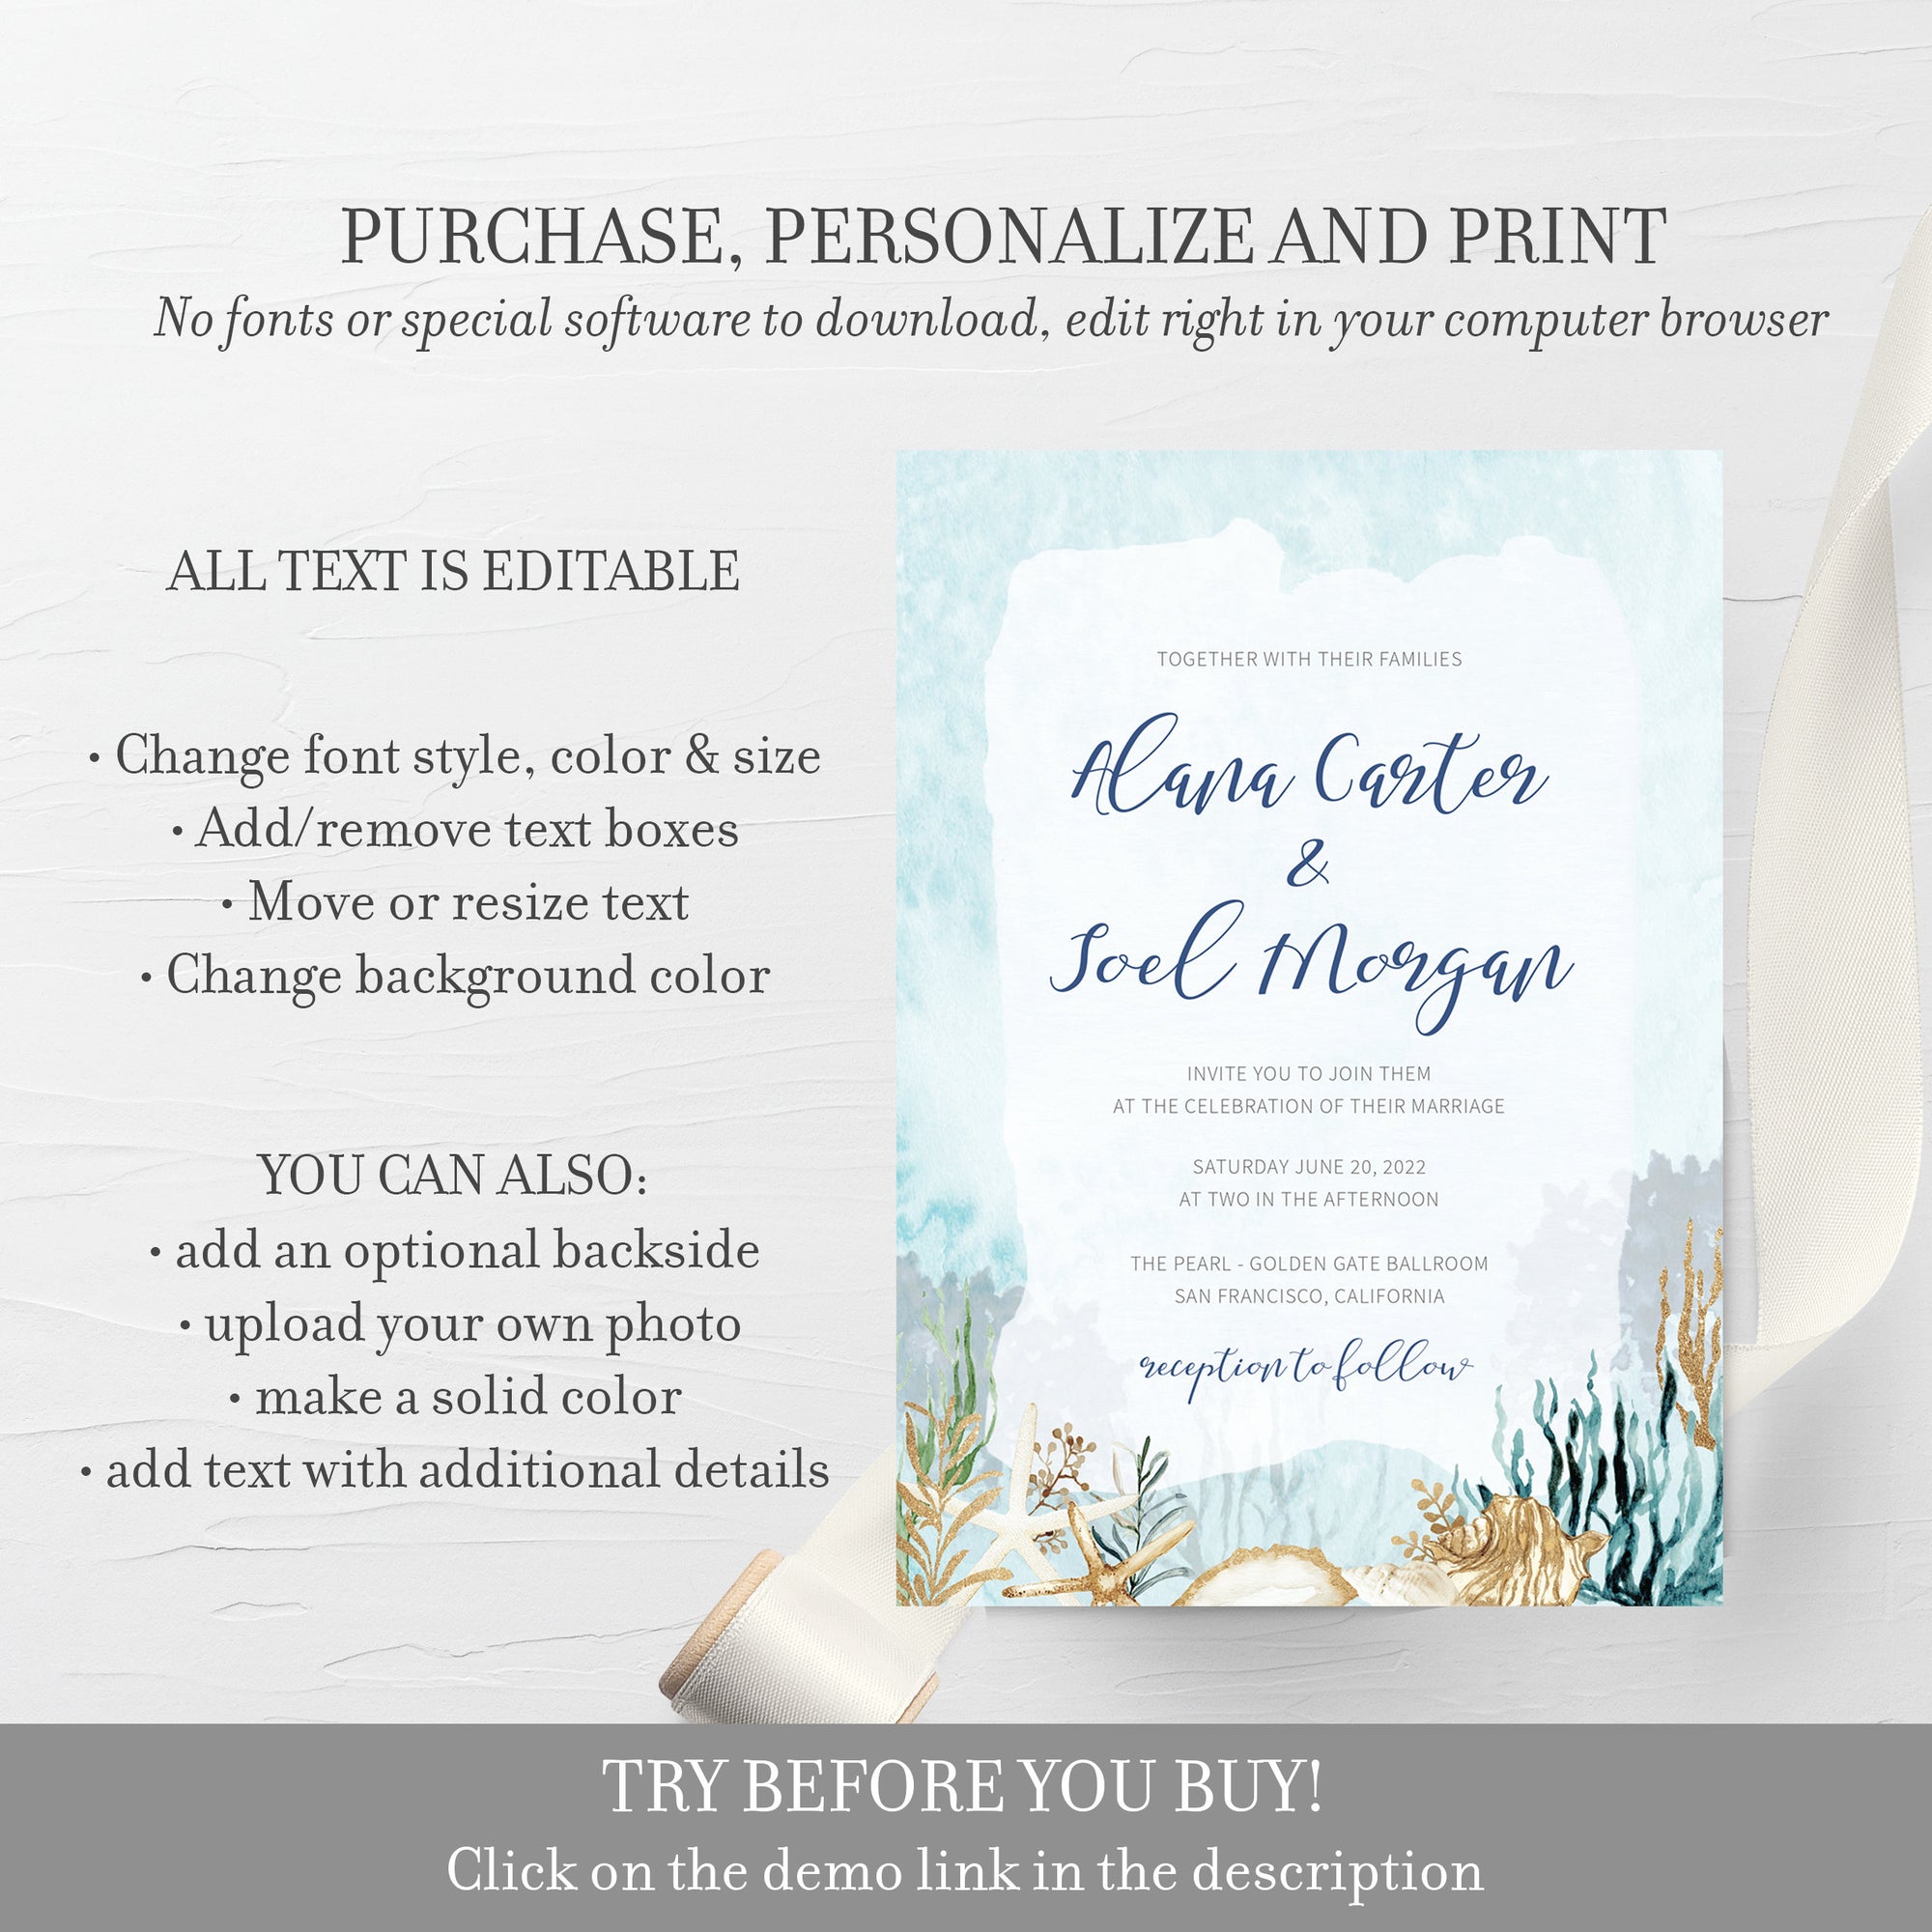 Beach Themed Wedding Invitations, Printable Beach Wedding Invitations Template, Beach Wedding Invite Set, INSTANT DOWNLOAD - MB200